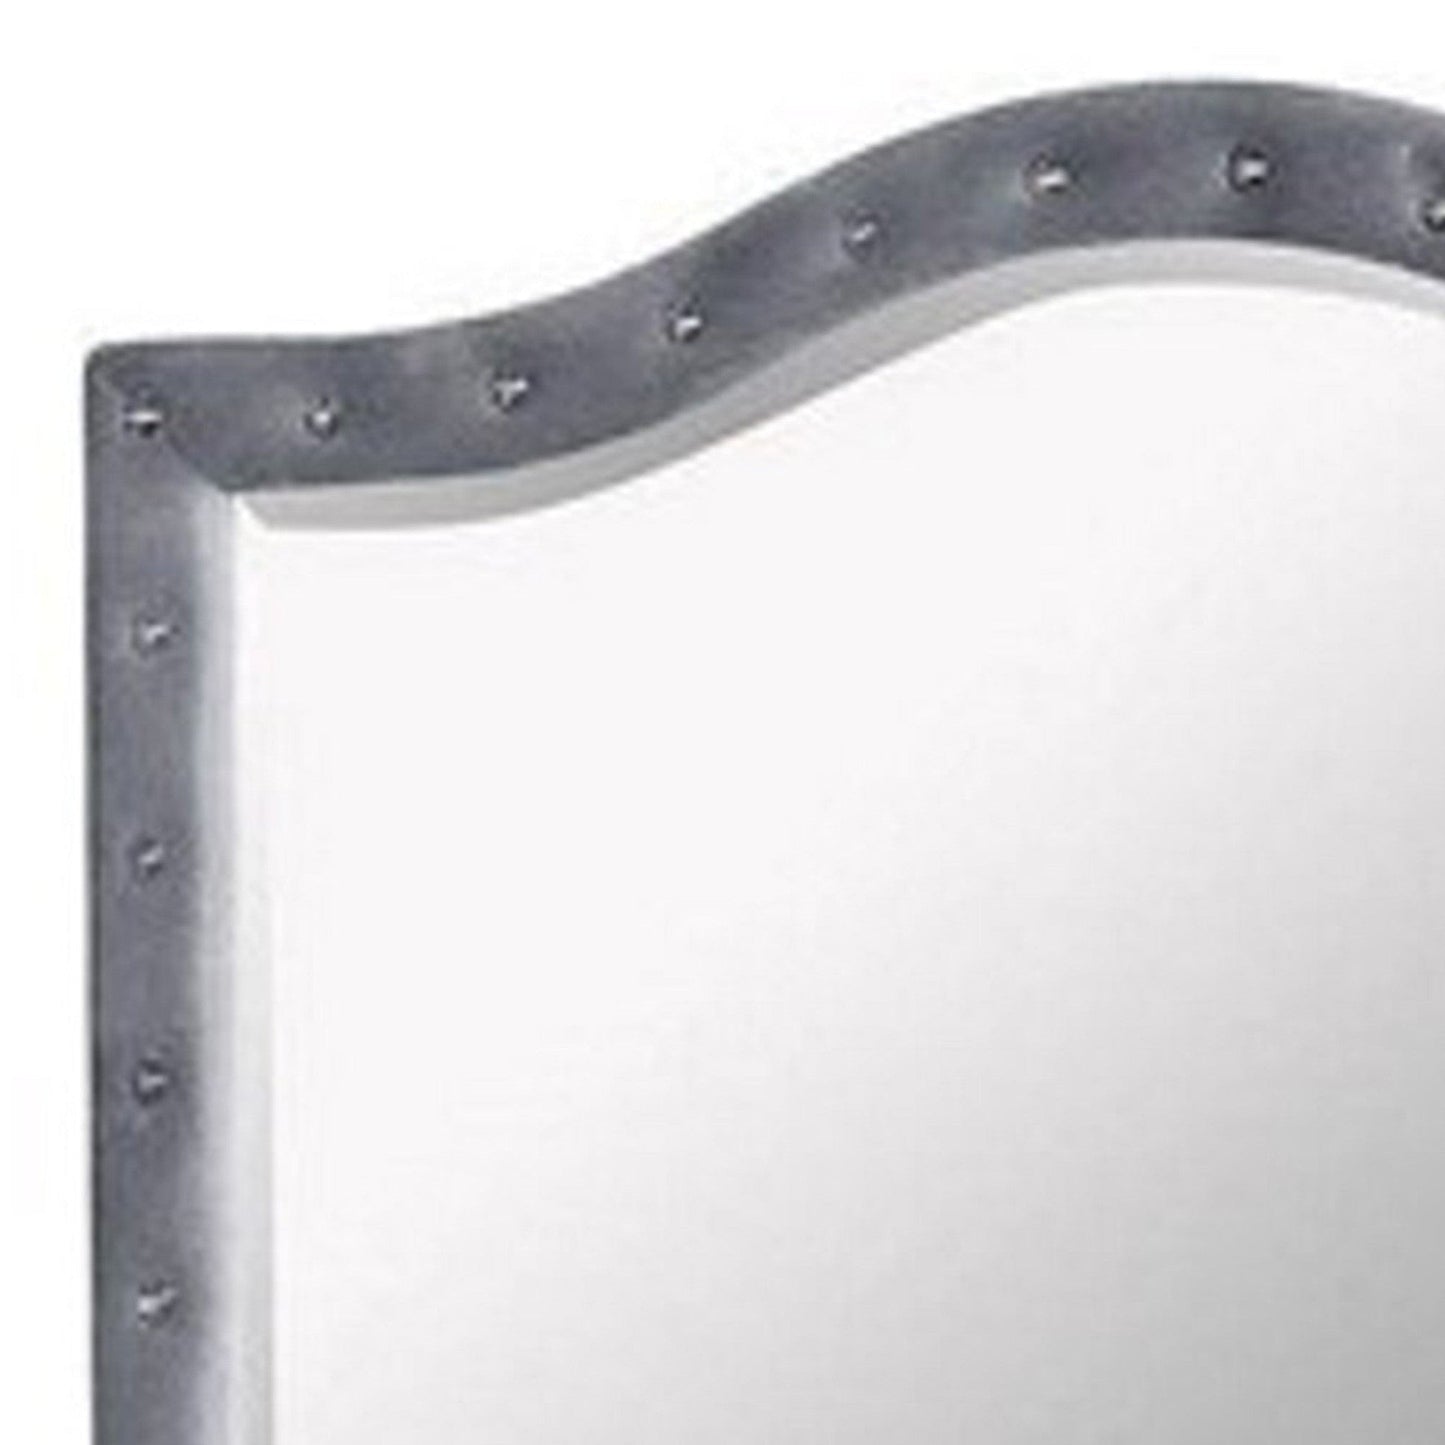 Benzara 38" Gray Fabric Padded Frame Mirror With Button Tufting